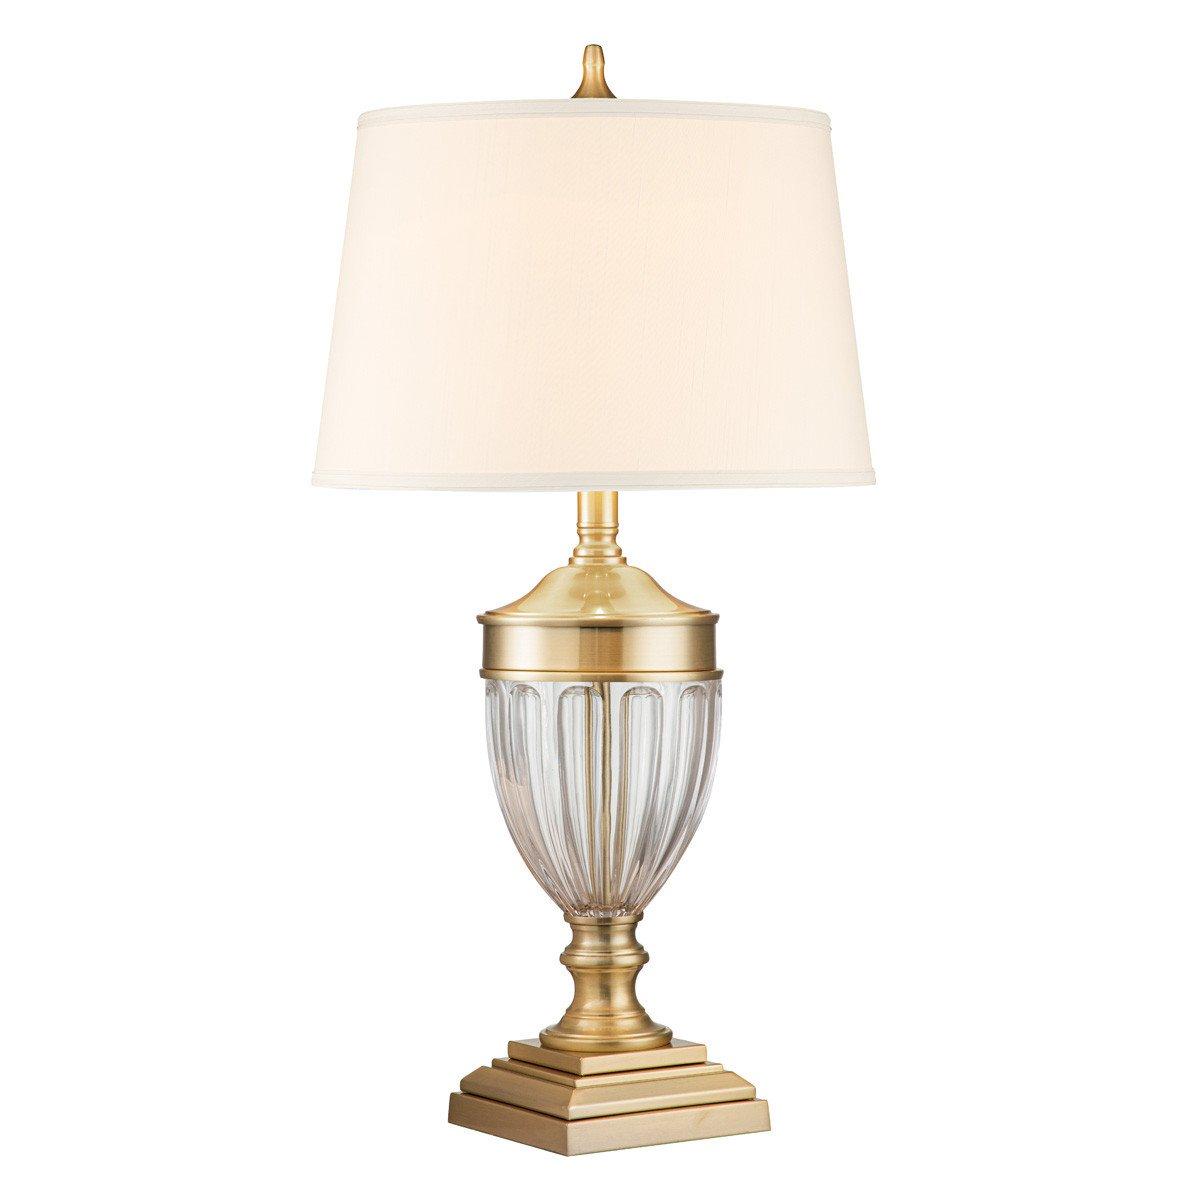 Quoizel Dennison Table Lamp with Round Tapered Shade Brushed Brass